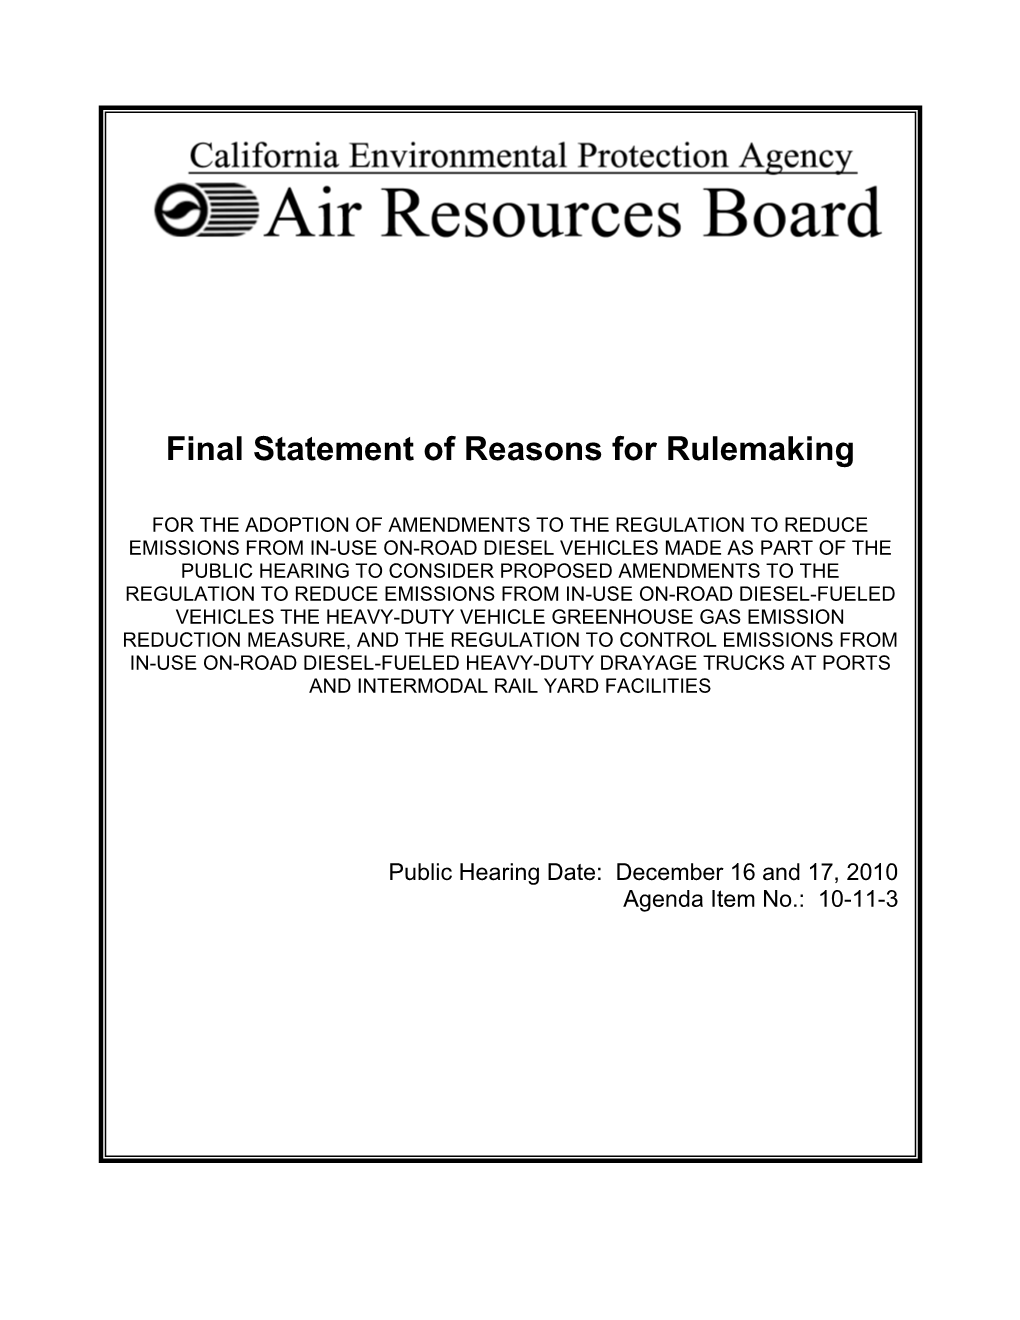 Final Statement of Reasons for Rulemaking